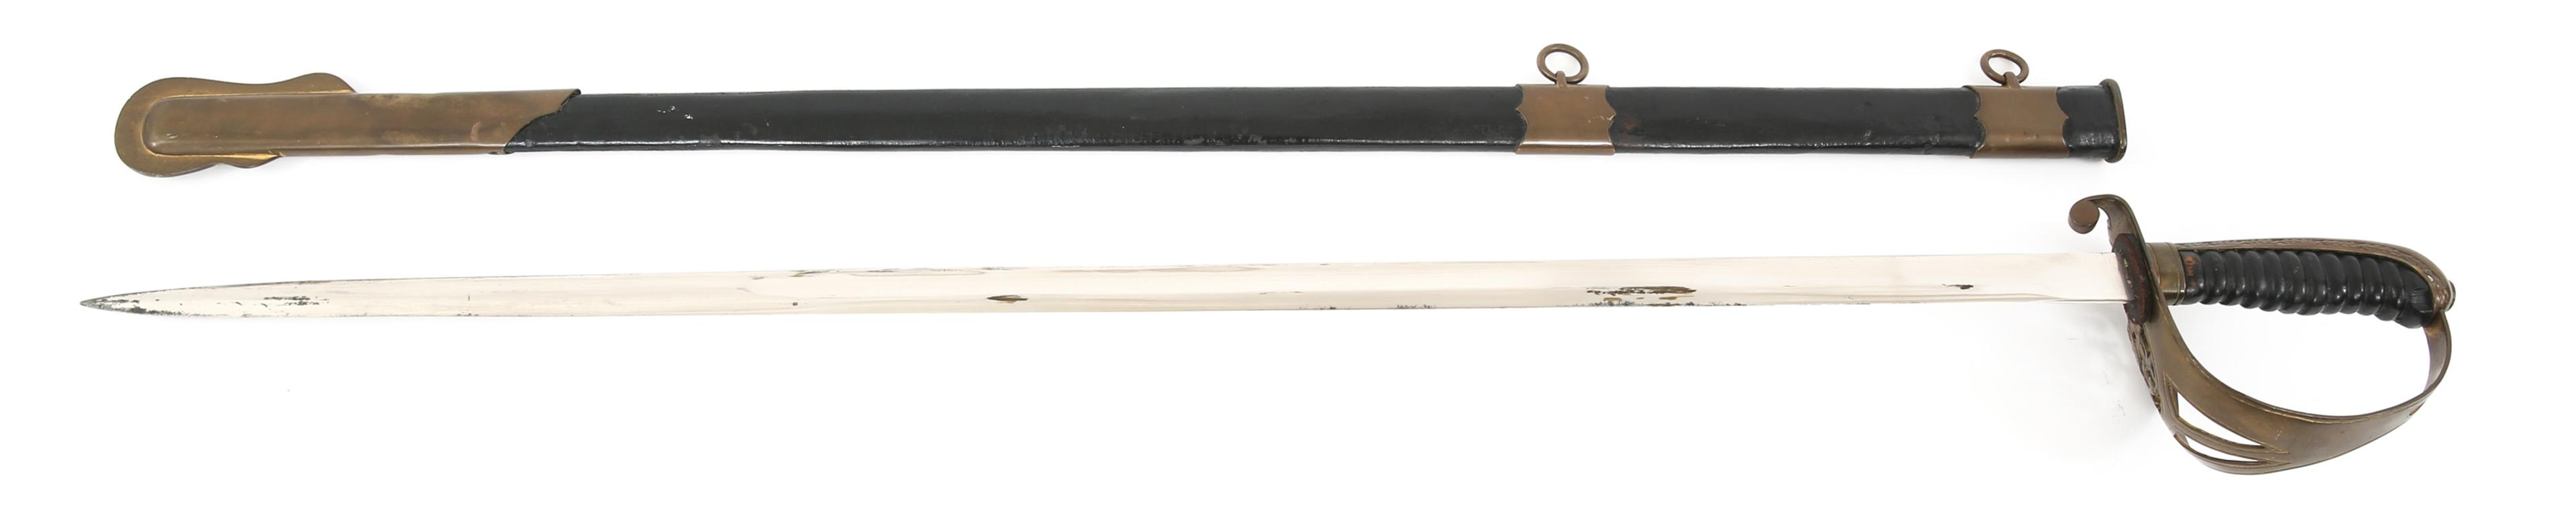 19th C. LATVIAN OFFICER SWORD WITH SCABBARD